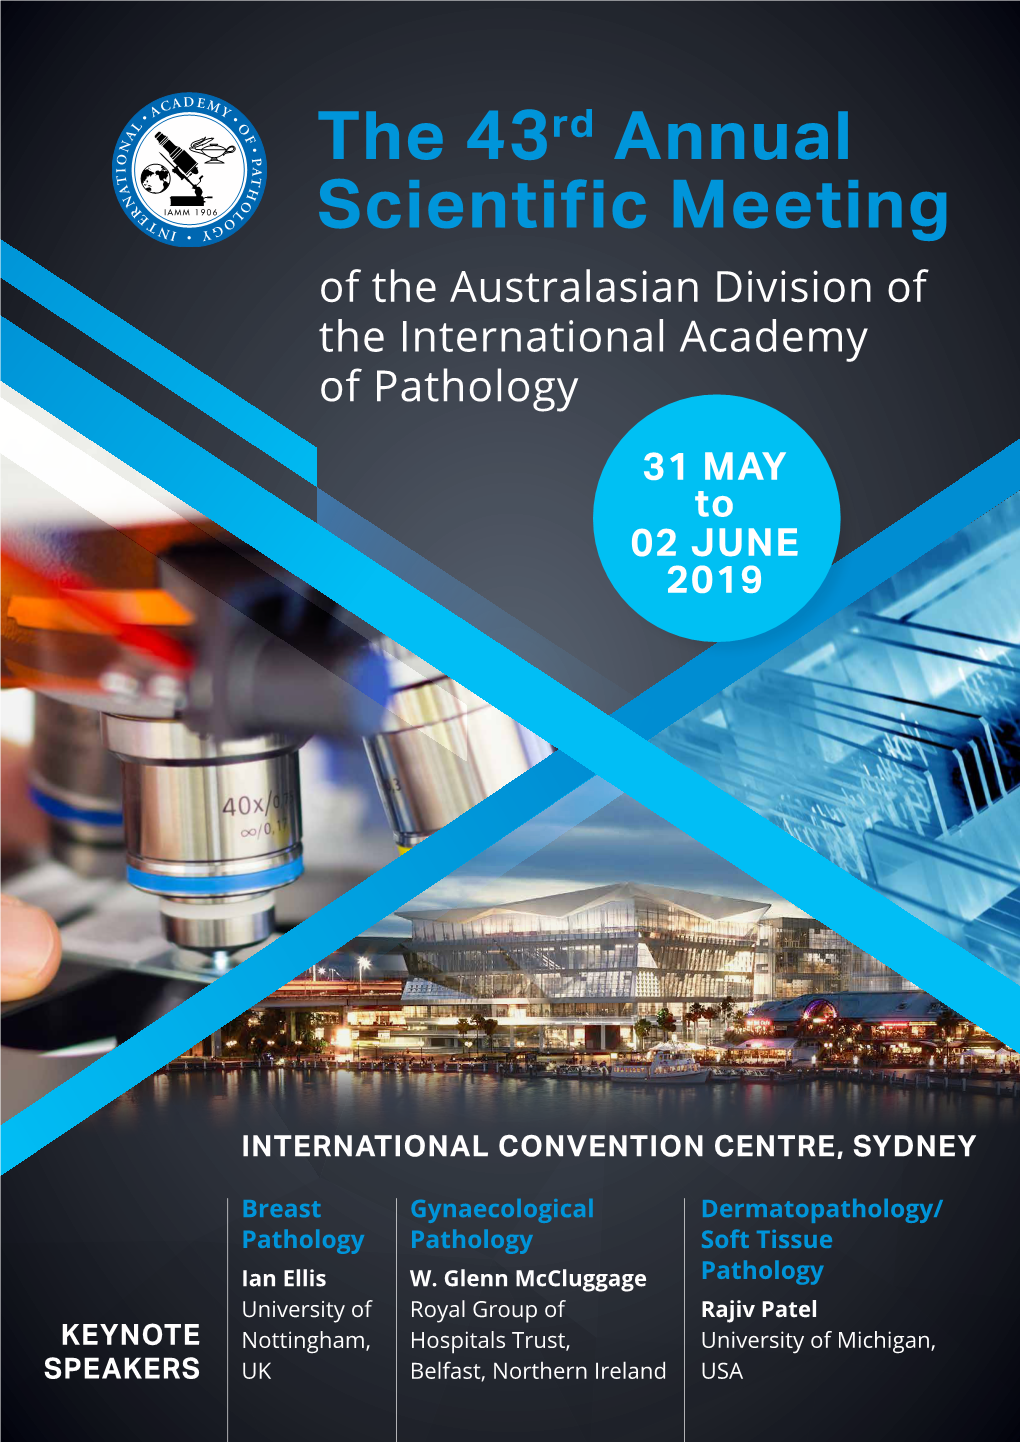 The 43Rd Annual Scientific Meeting of the Australasian Division of the International Academy of Pathology